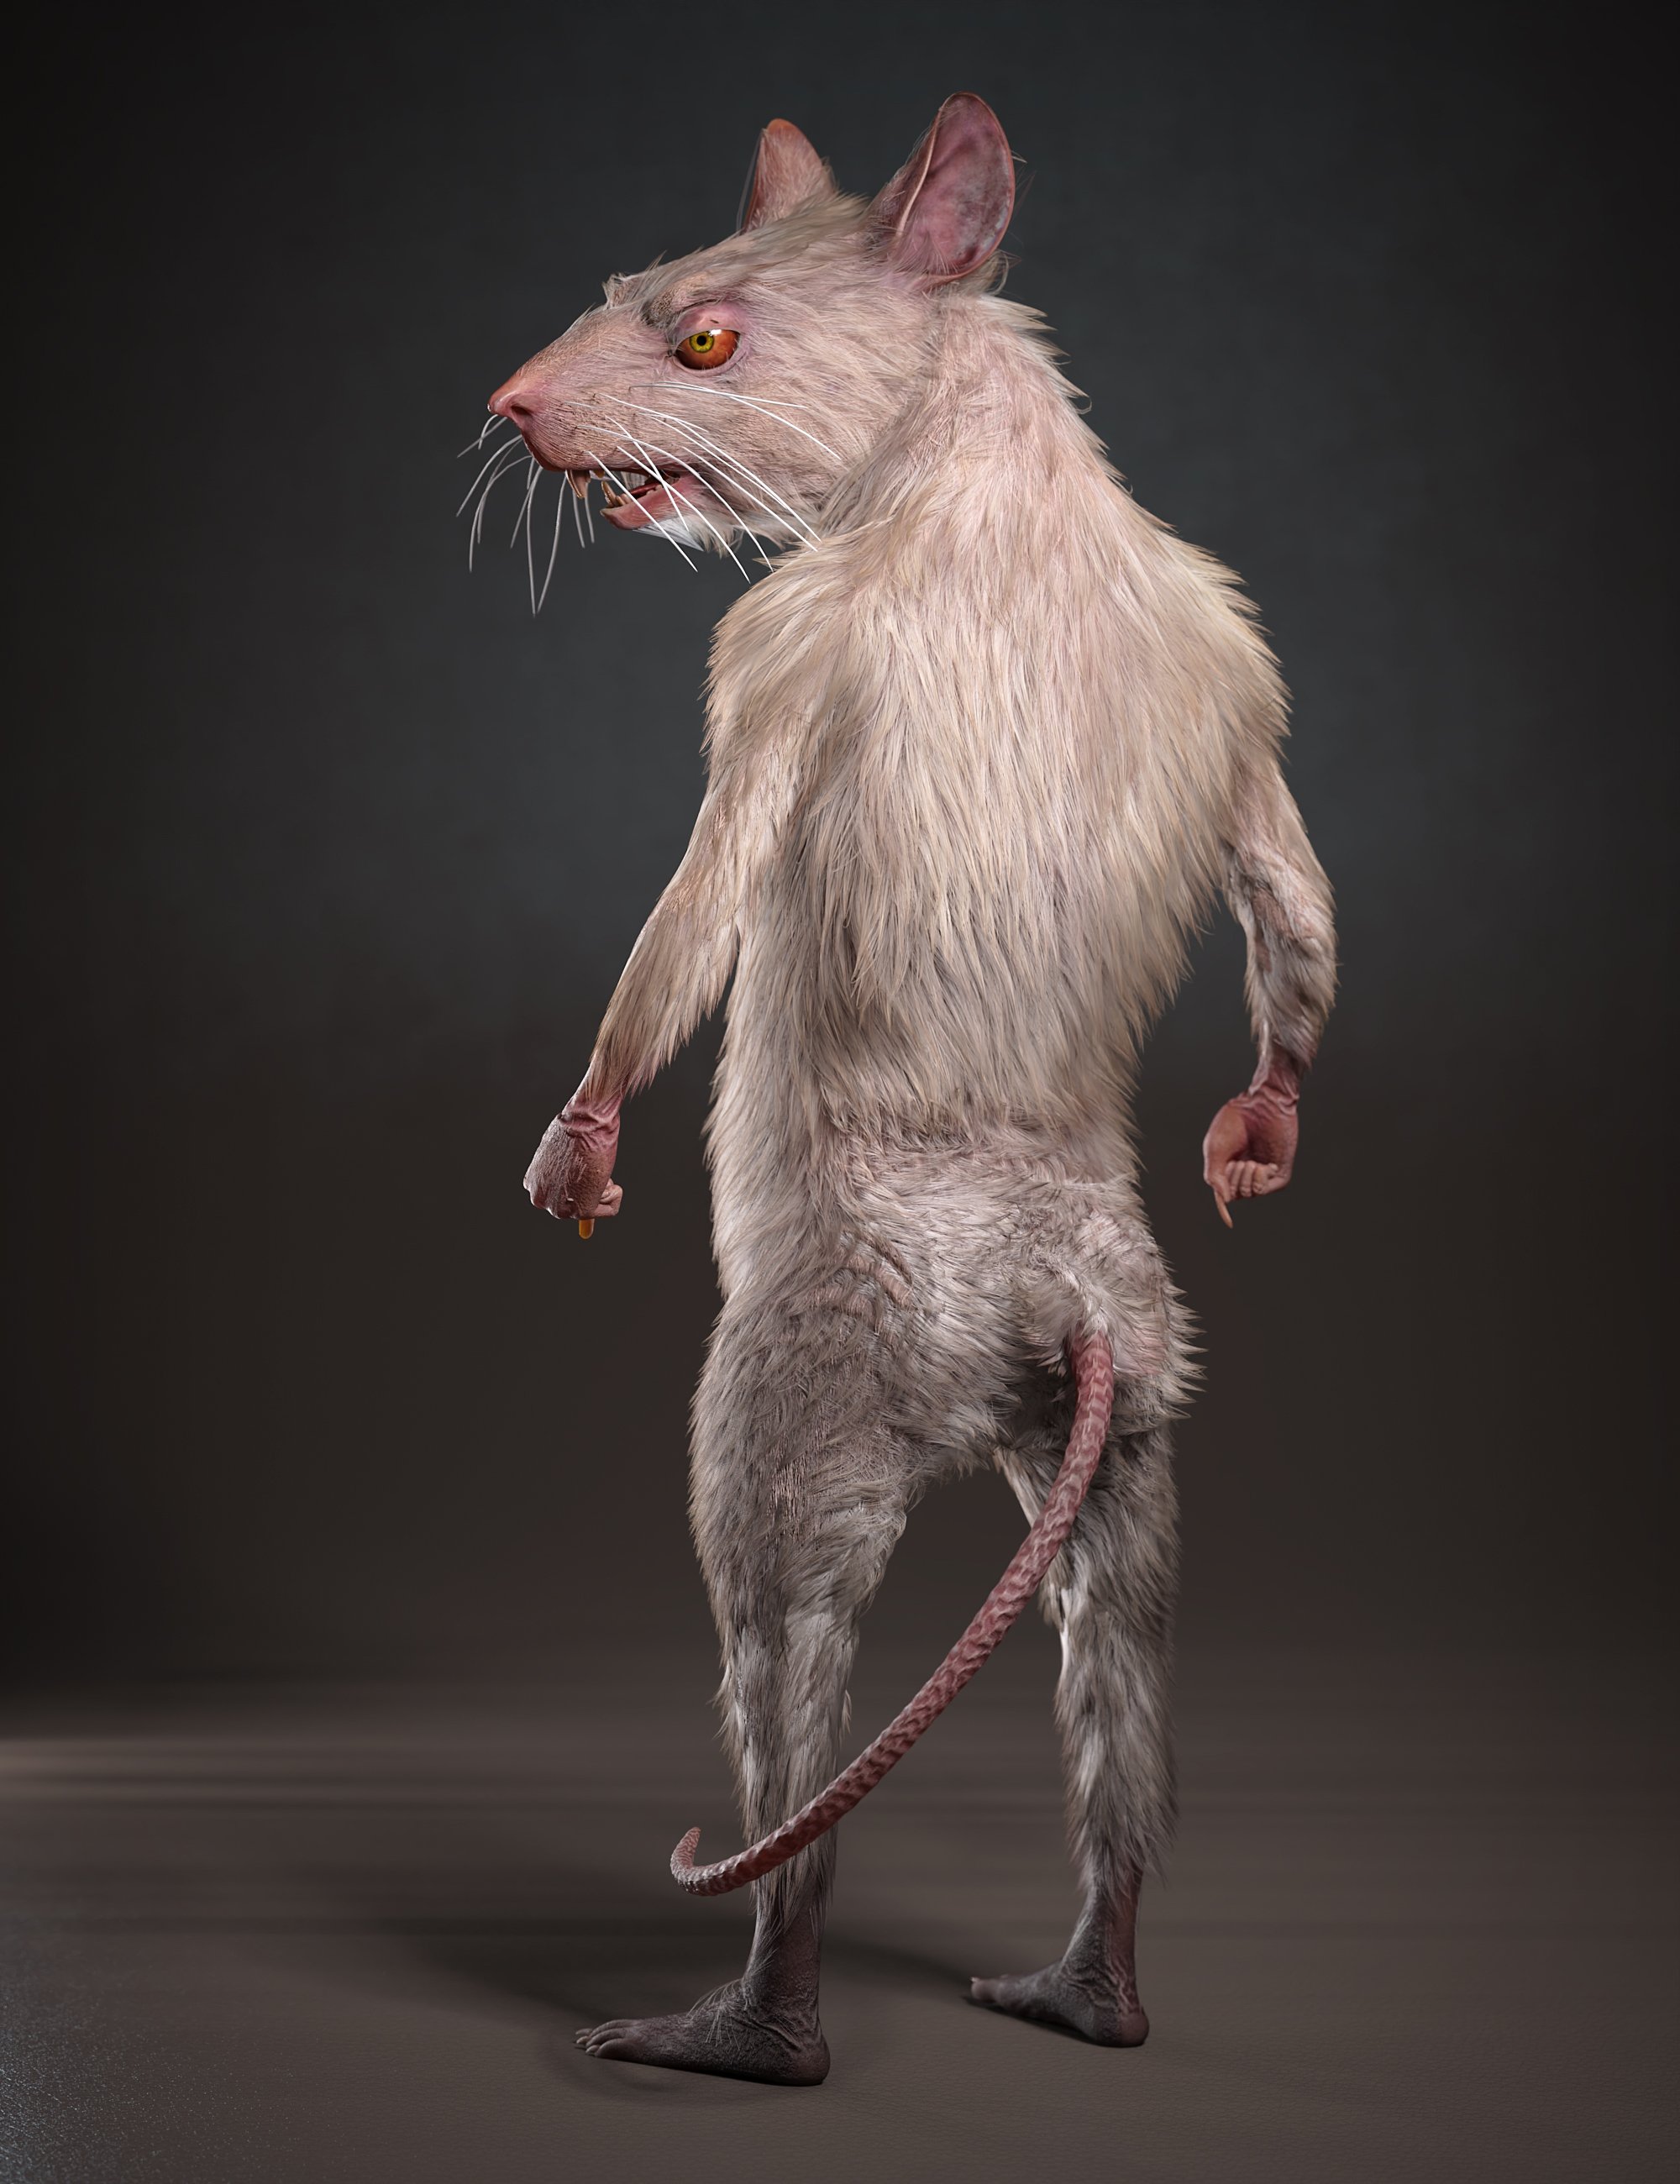 Mouse King for Genesis 8.1 Males by: JoeQuick, 3D Models by Daz 3D